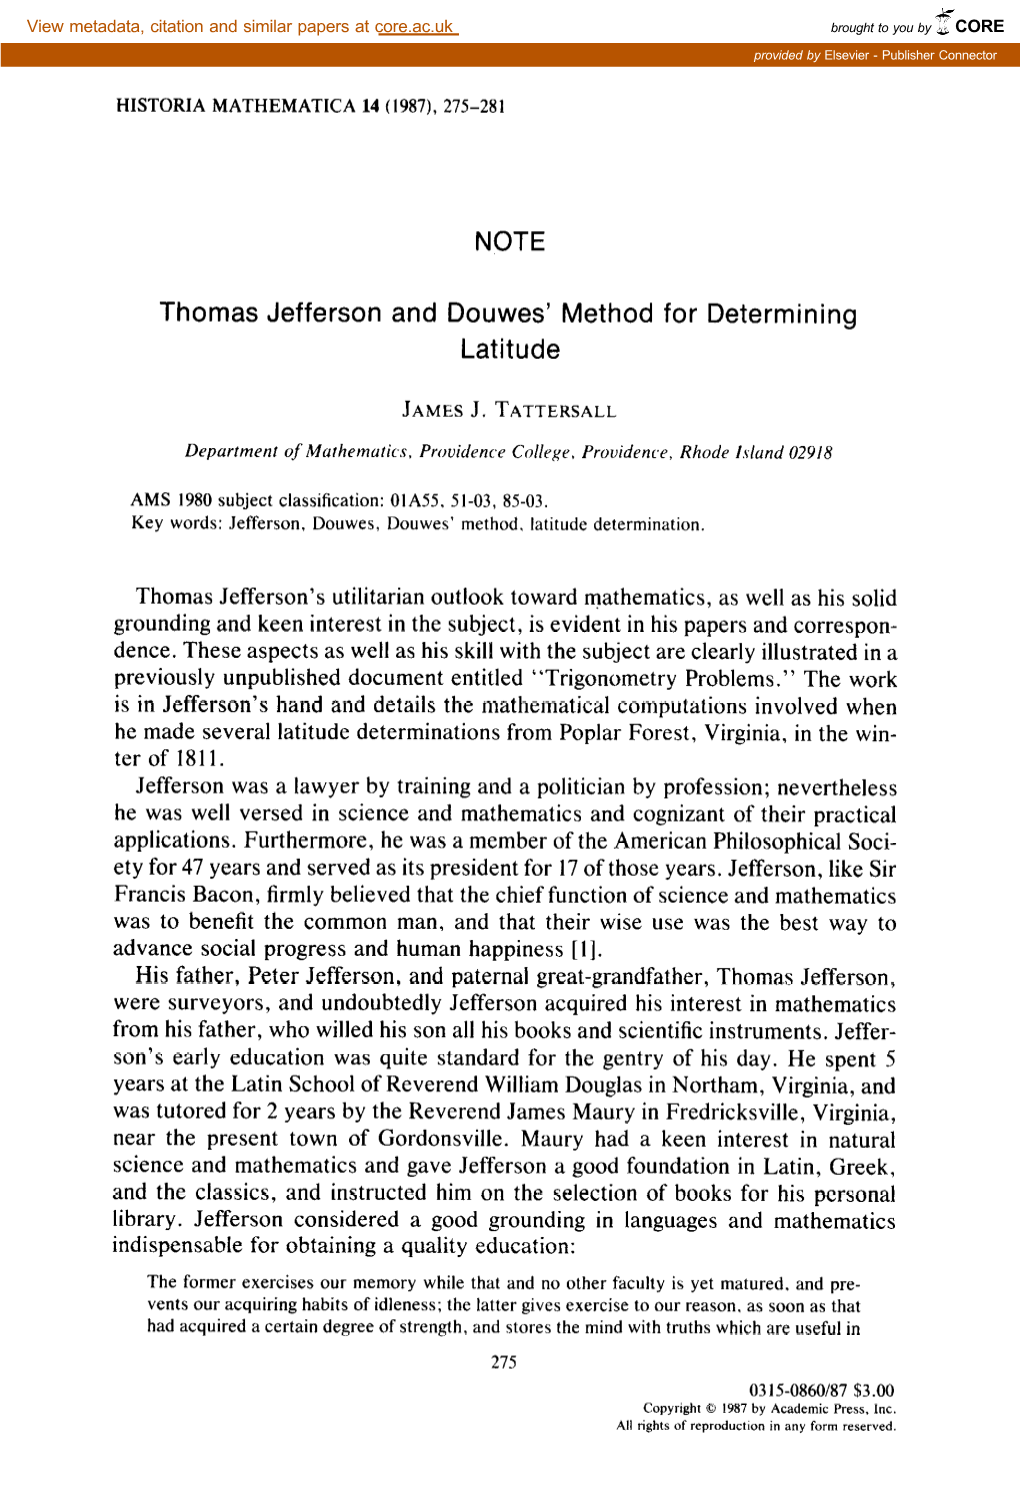 NOTE Thomas Jefferson and Douwes' Method for Determining